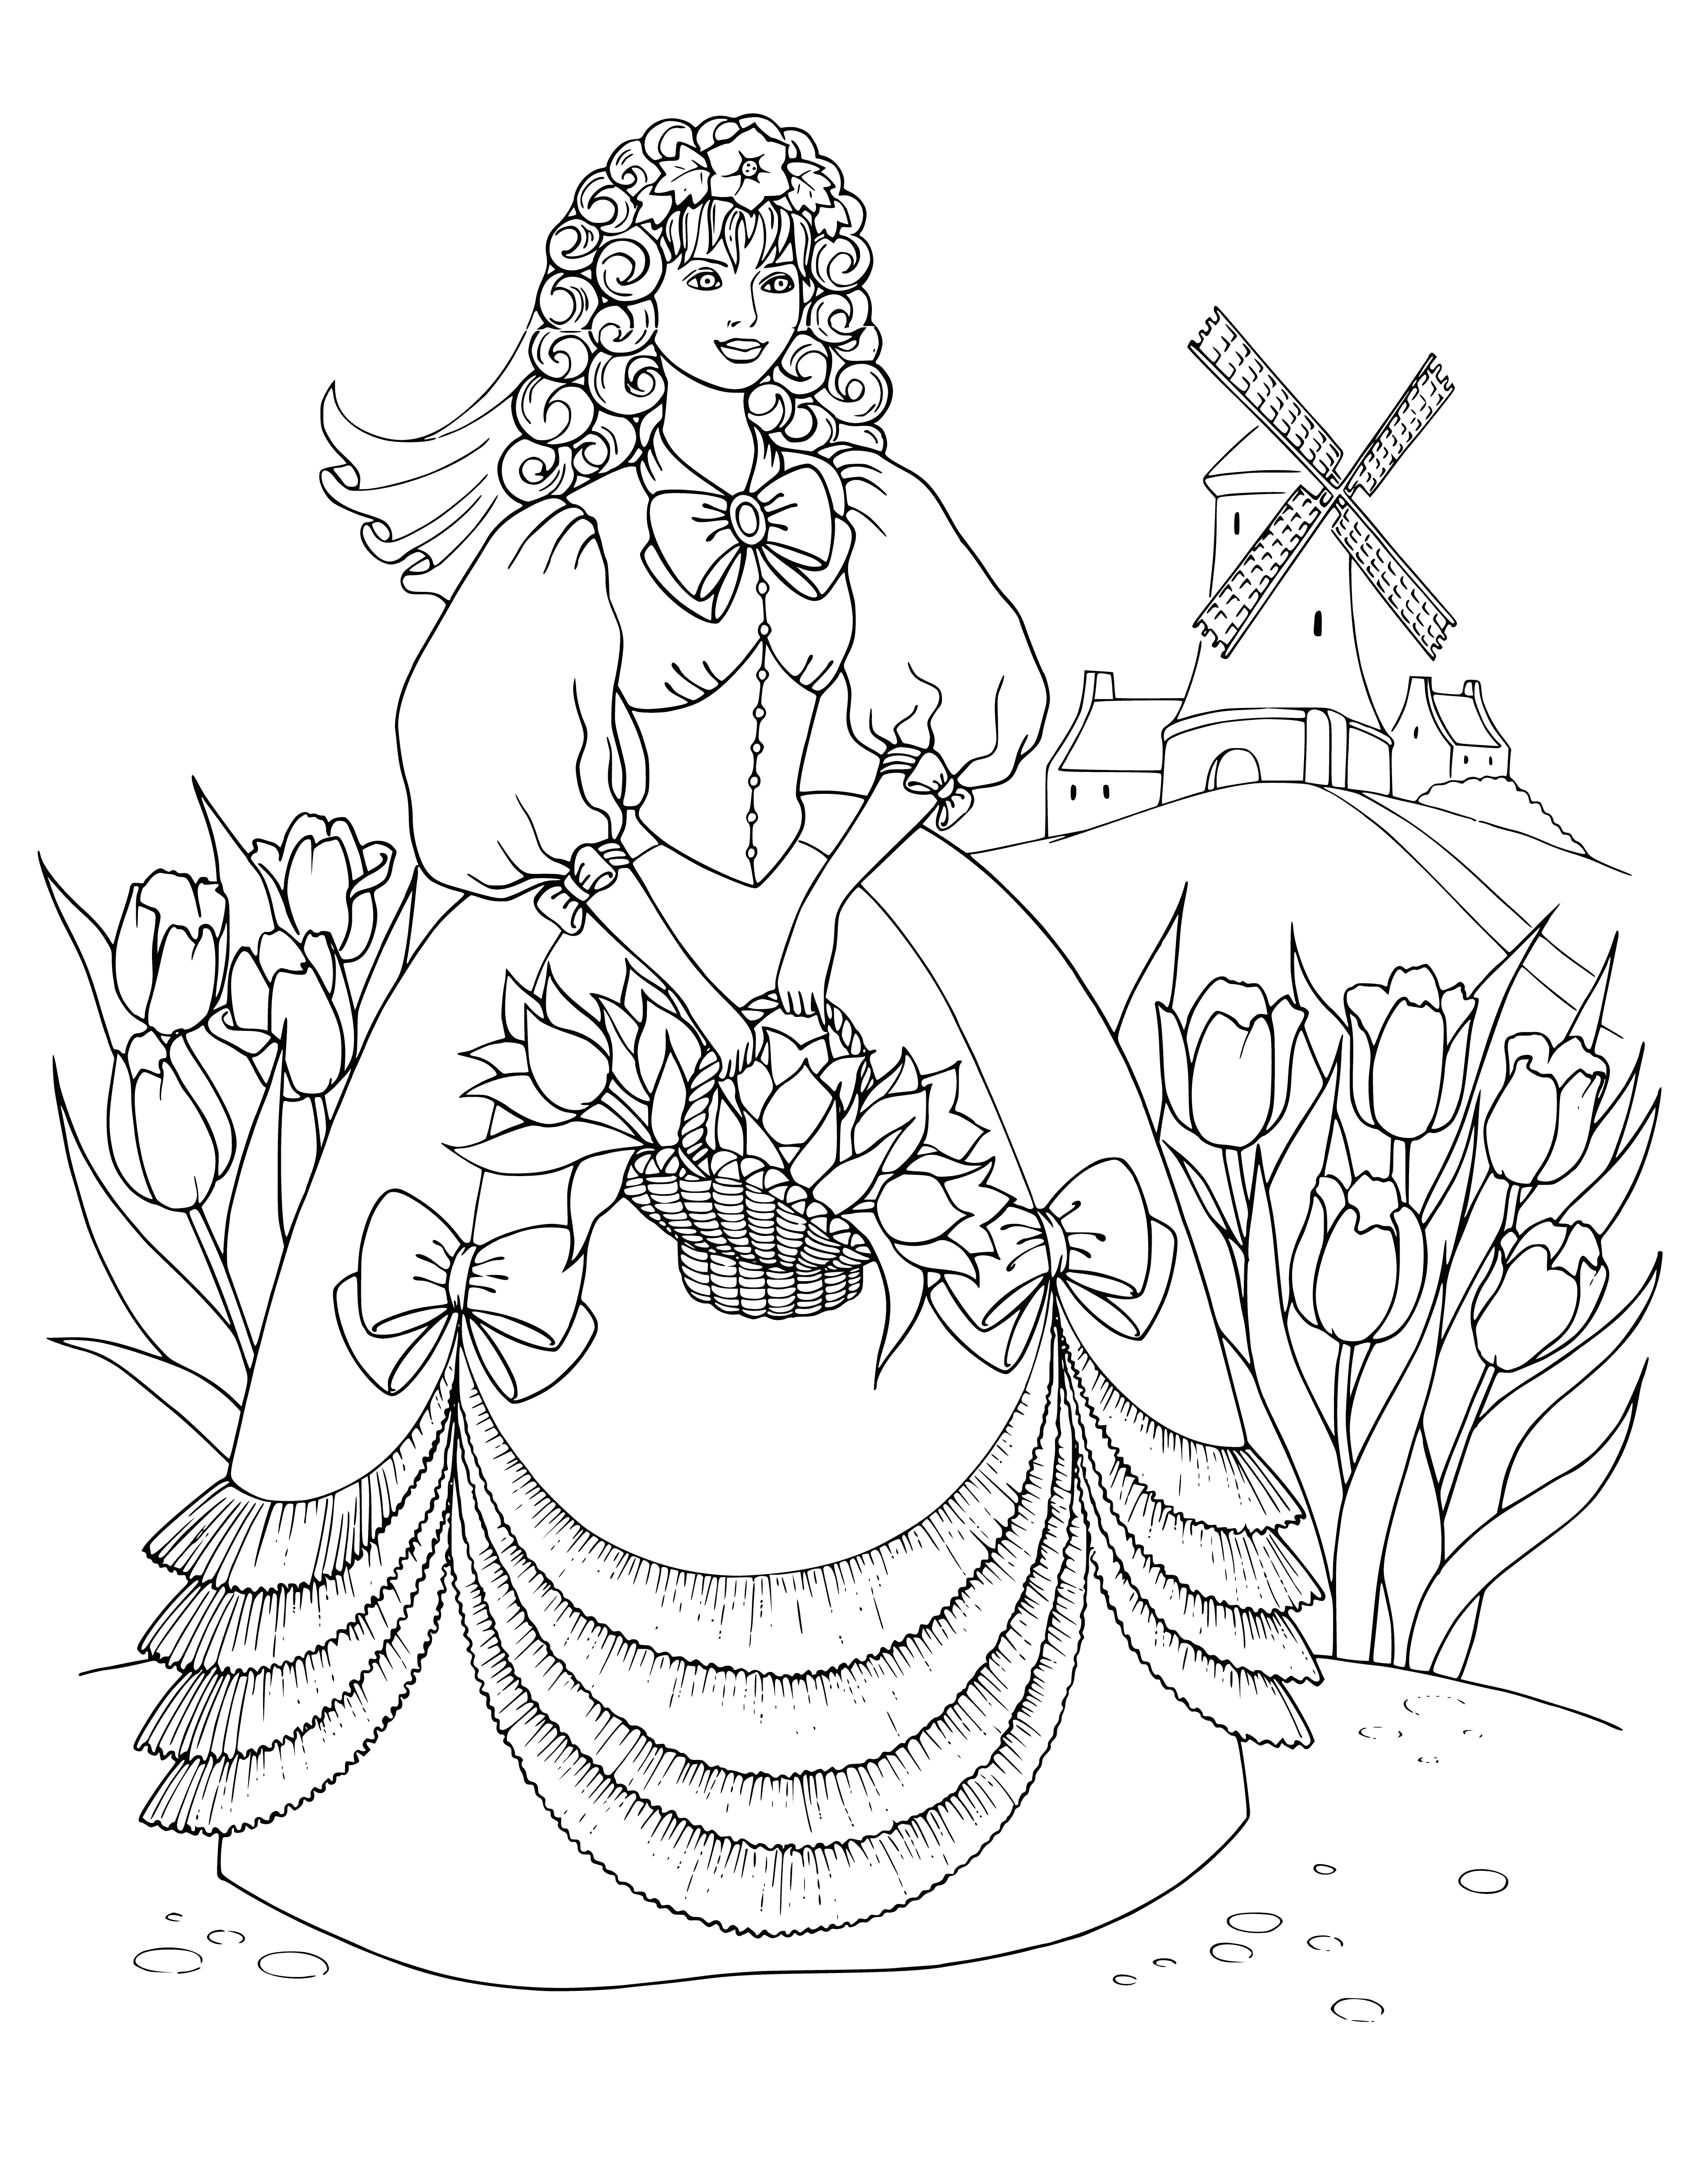 coloring page: Young woman in pink dress smiling, standing in front of large water wheel. #coloringpage